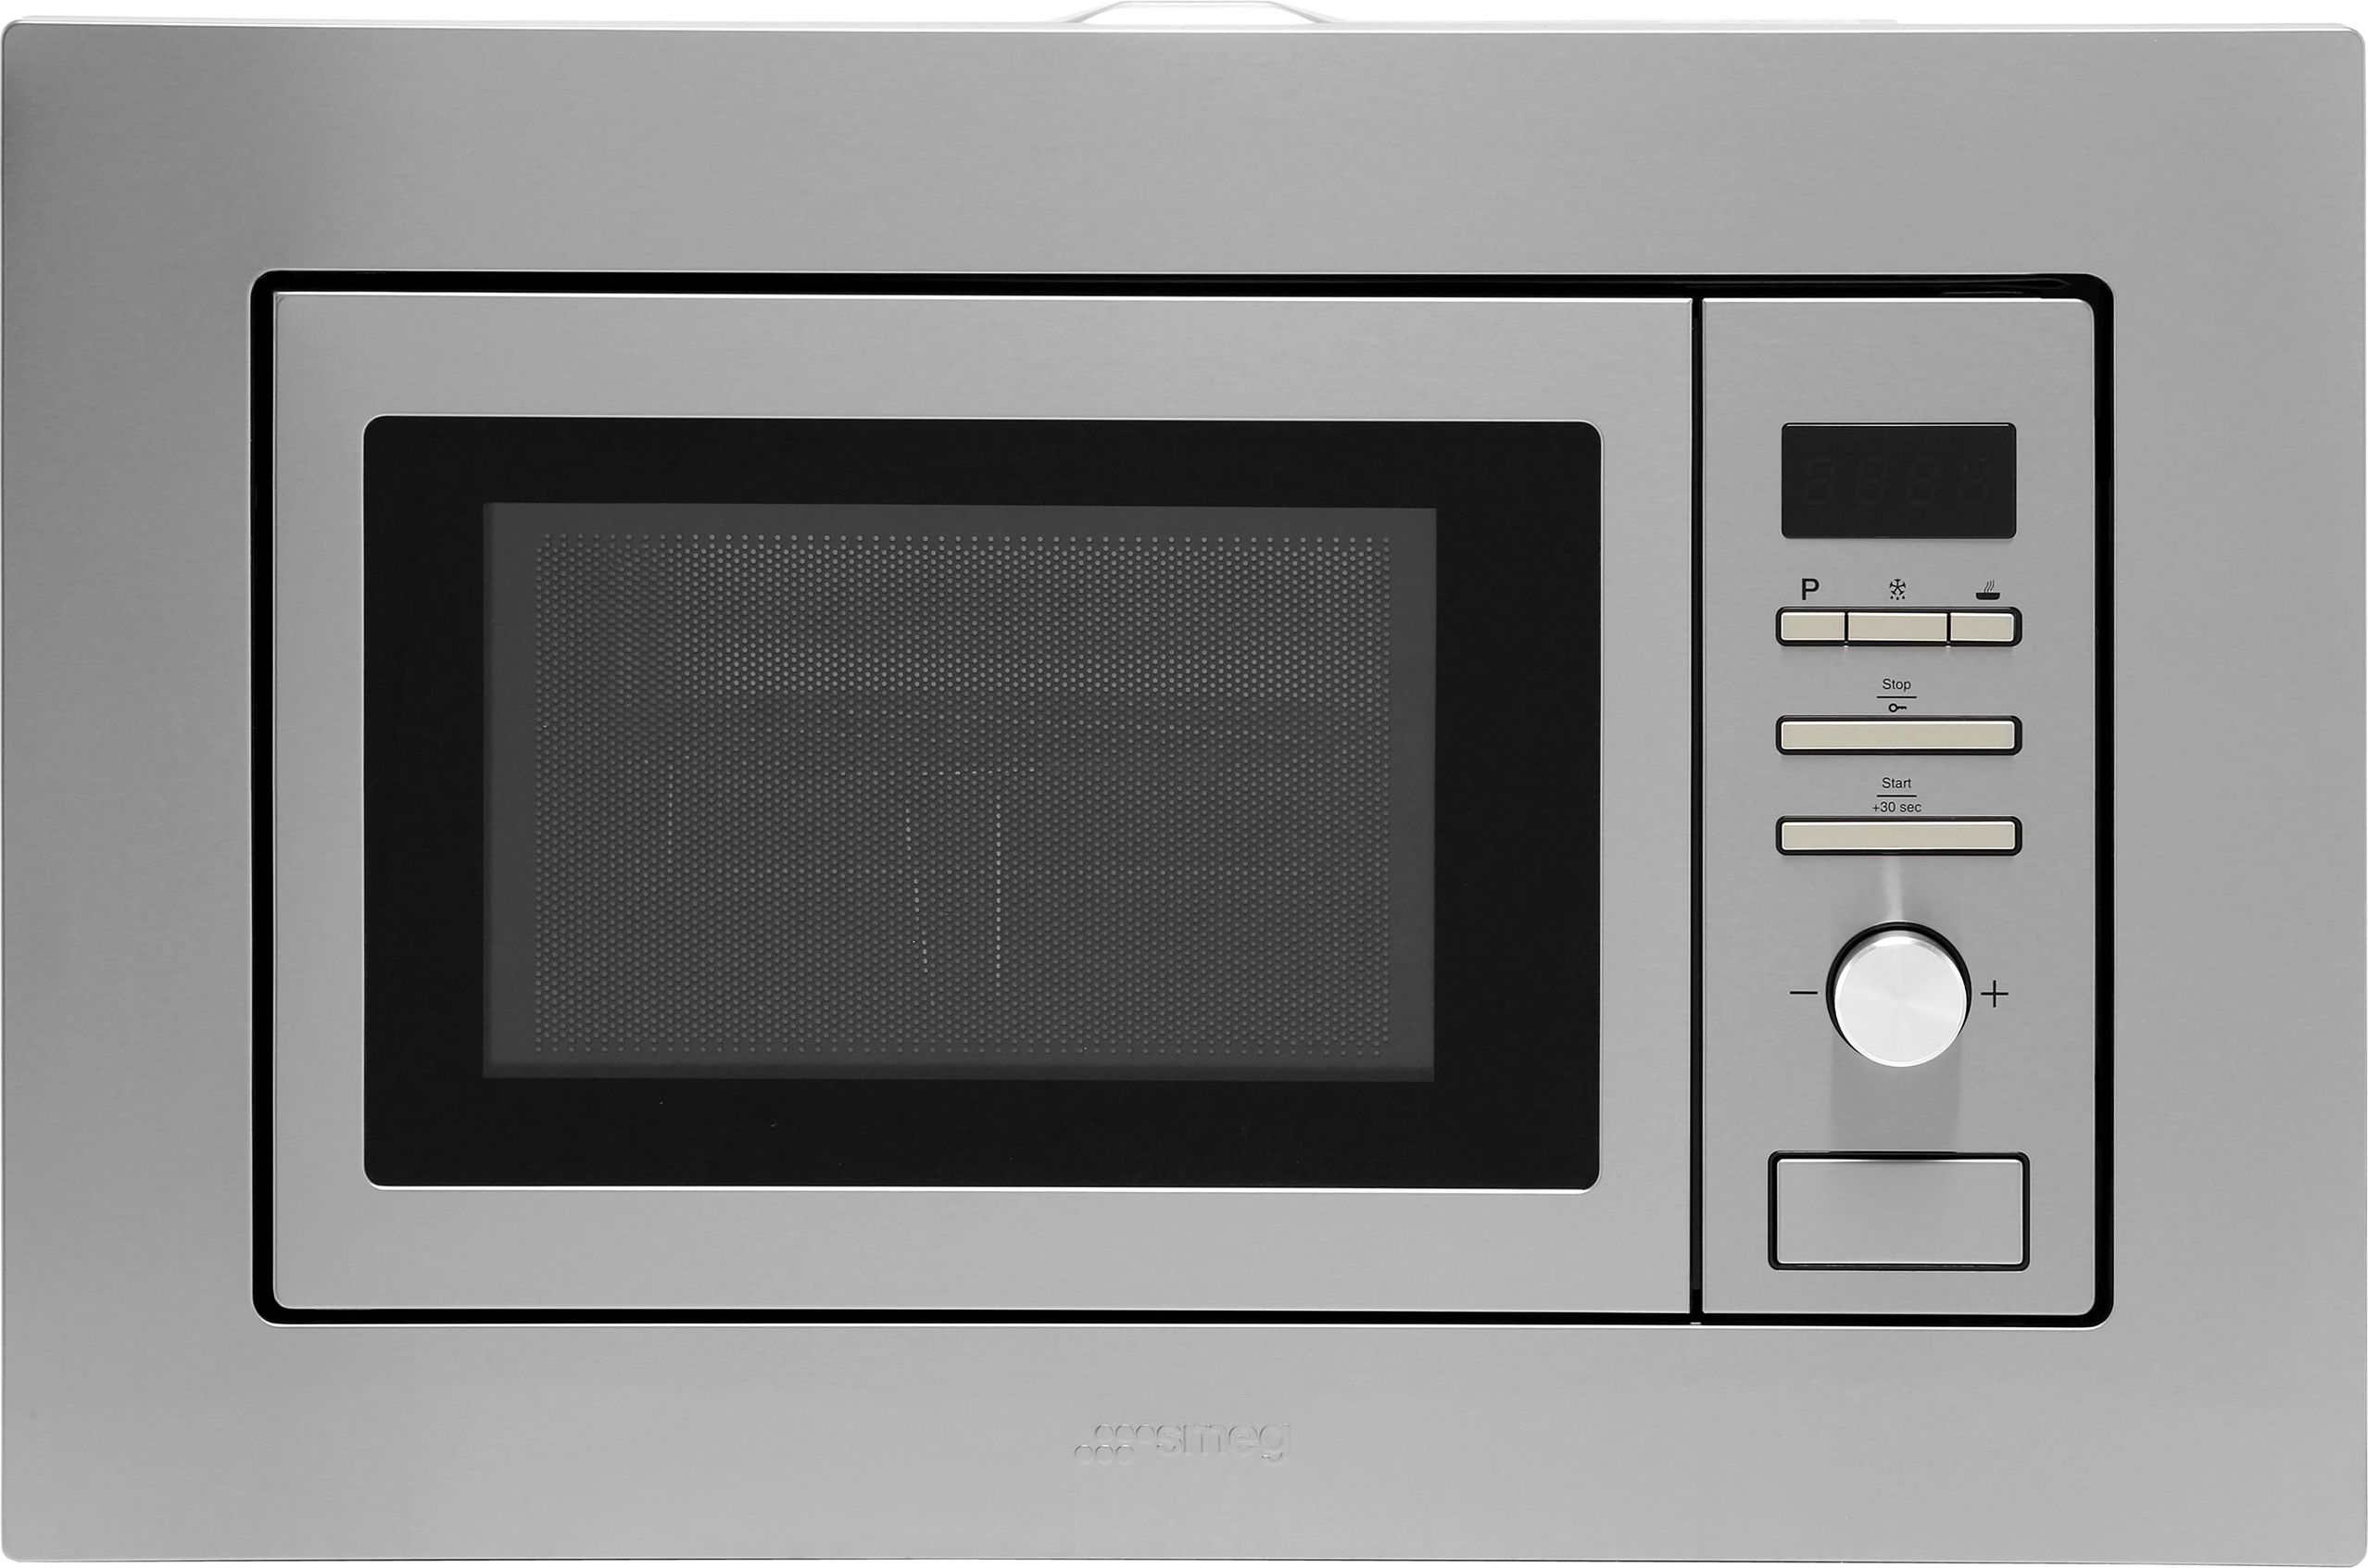 Smeg FMI020X Built In 39cm Tall Compact Microwave - Stainless Steel, Stainless Steel